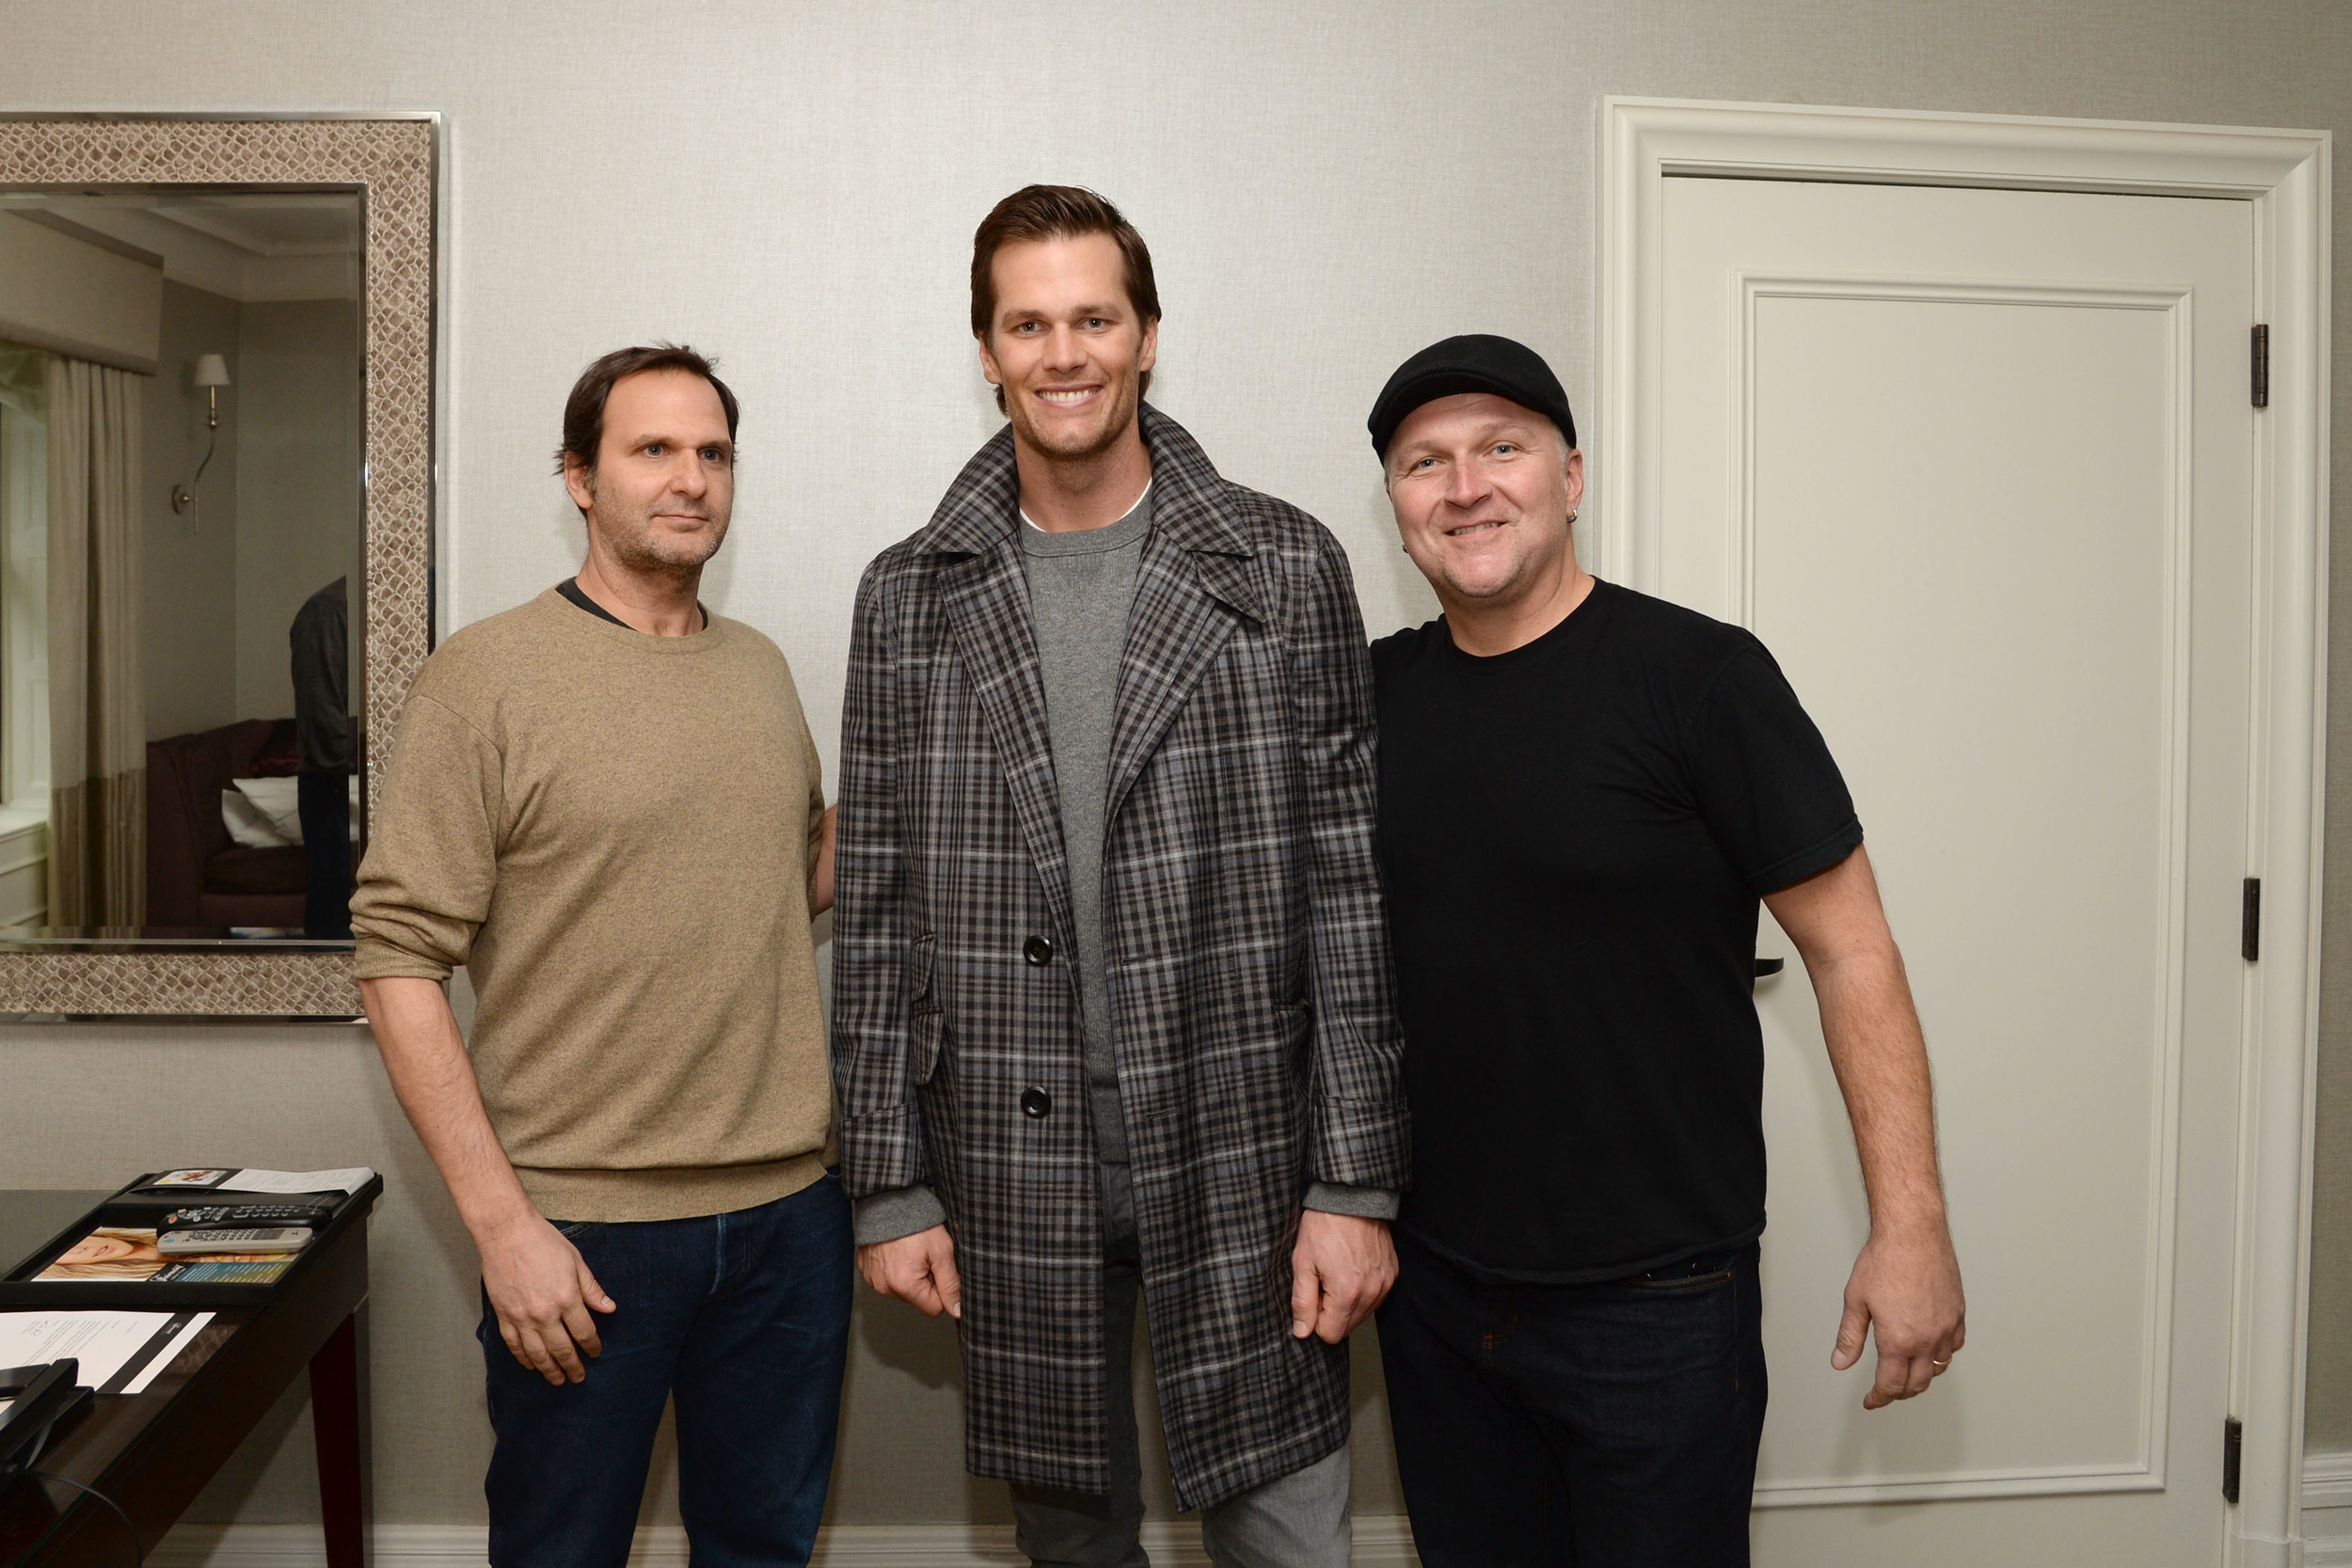  Me (on left) with Brady and Renner. I'm not blind or a wax figure. 